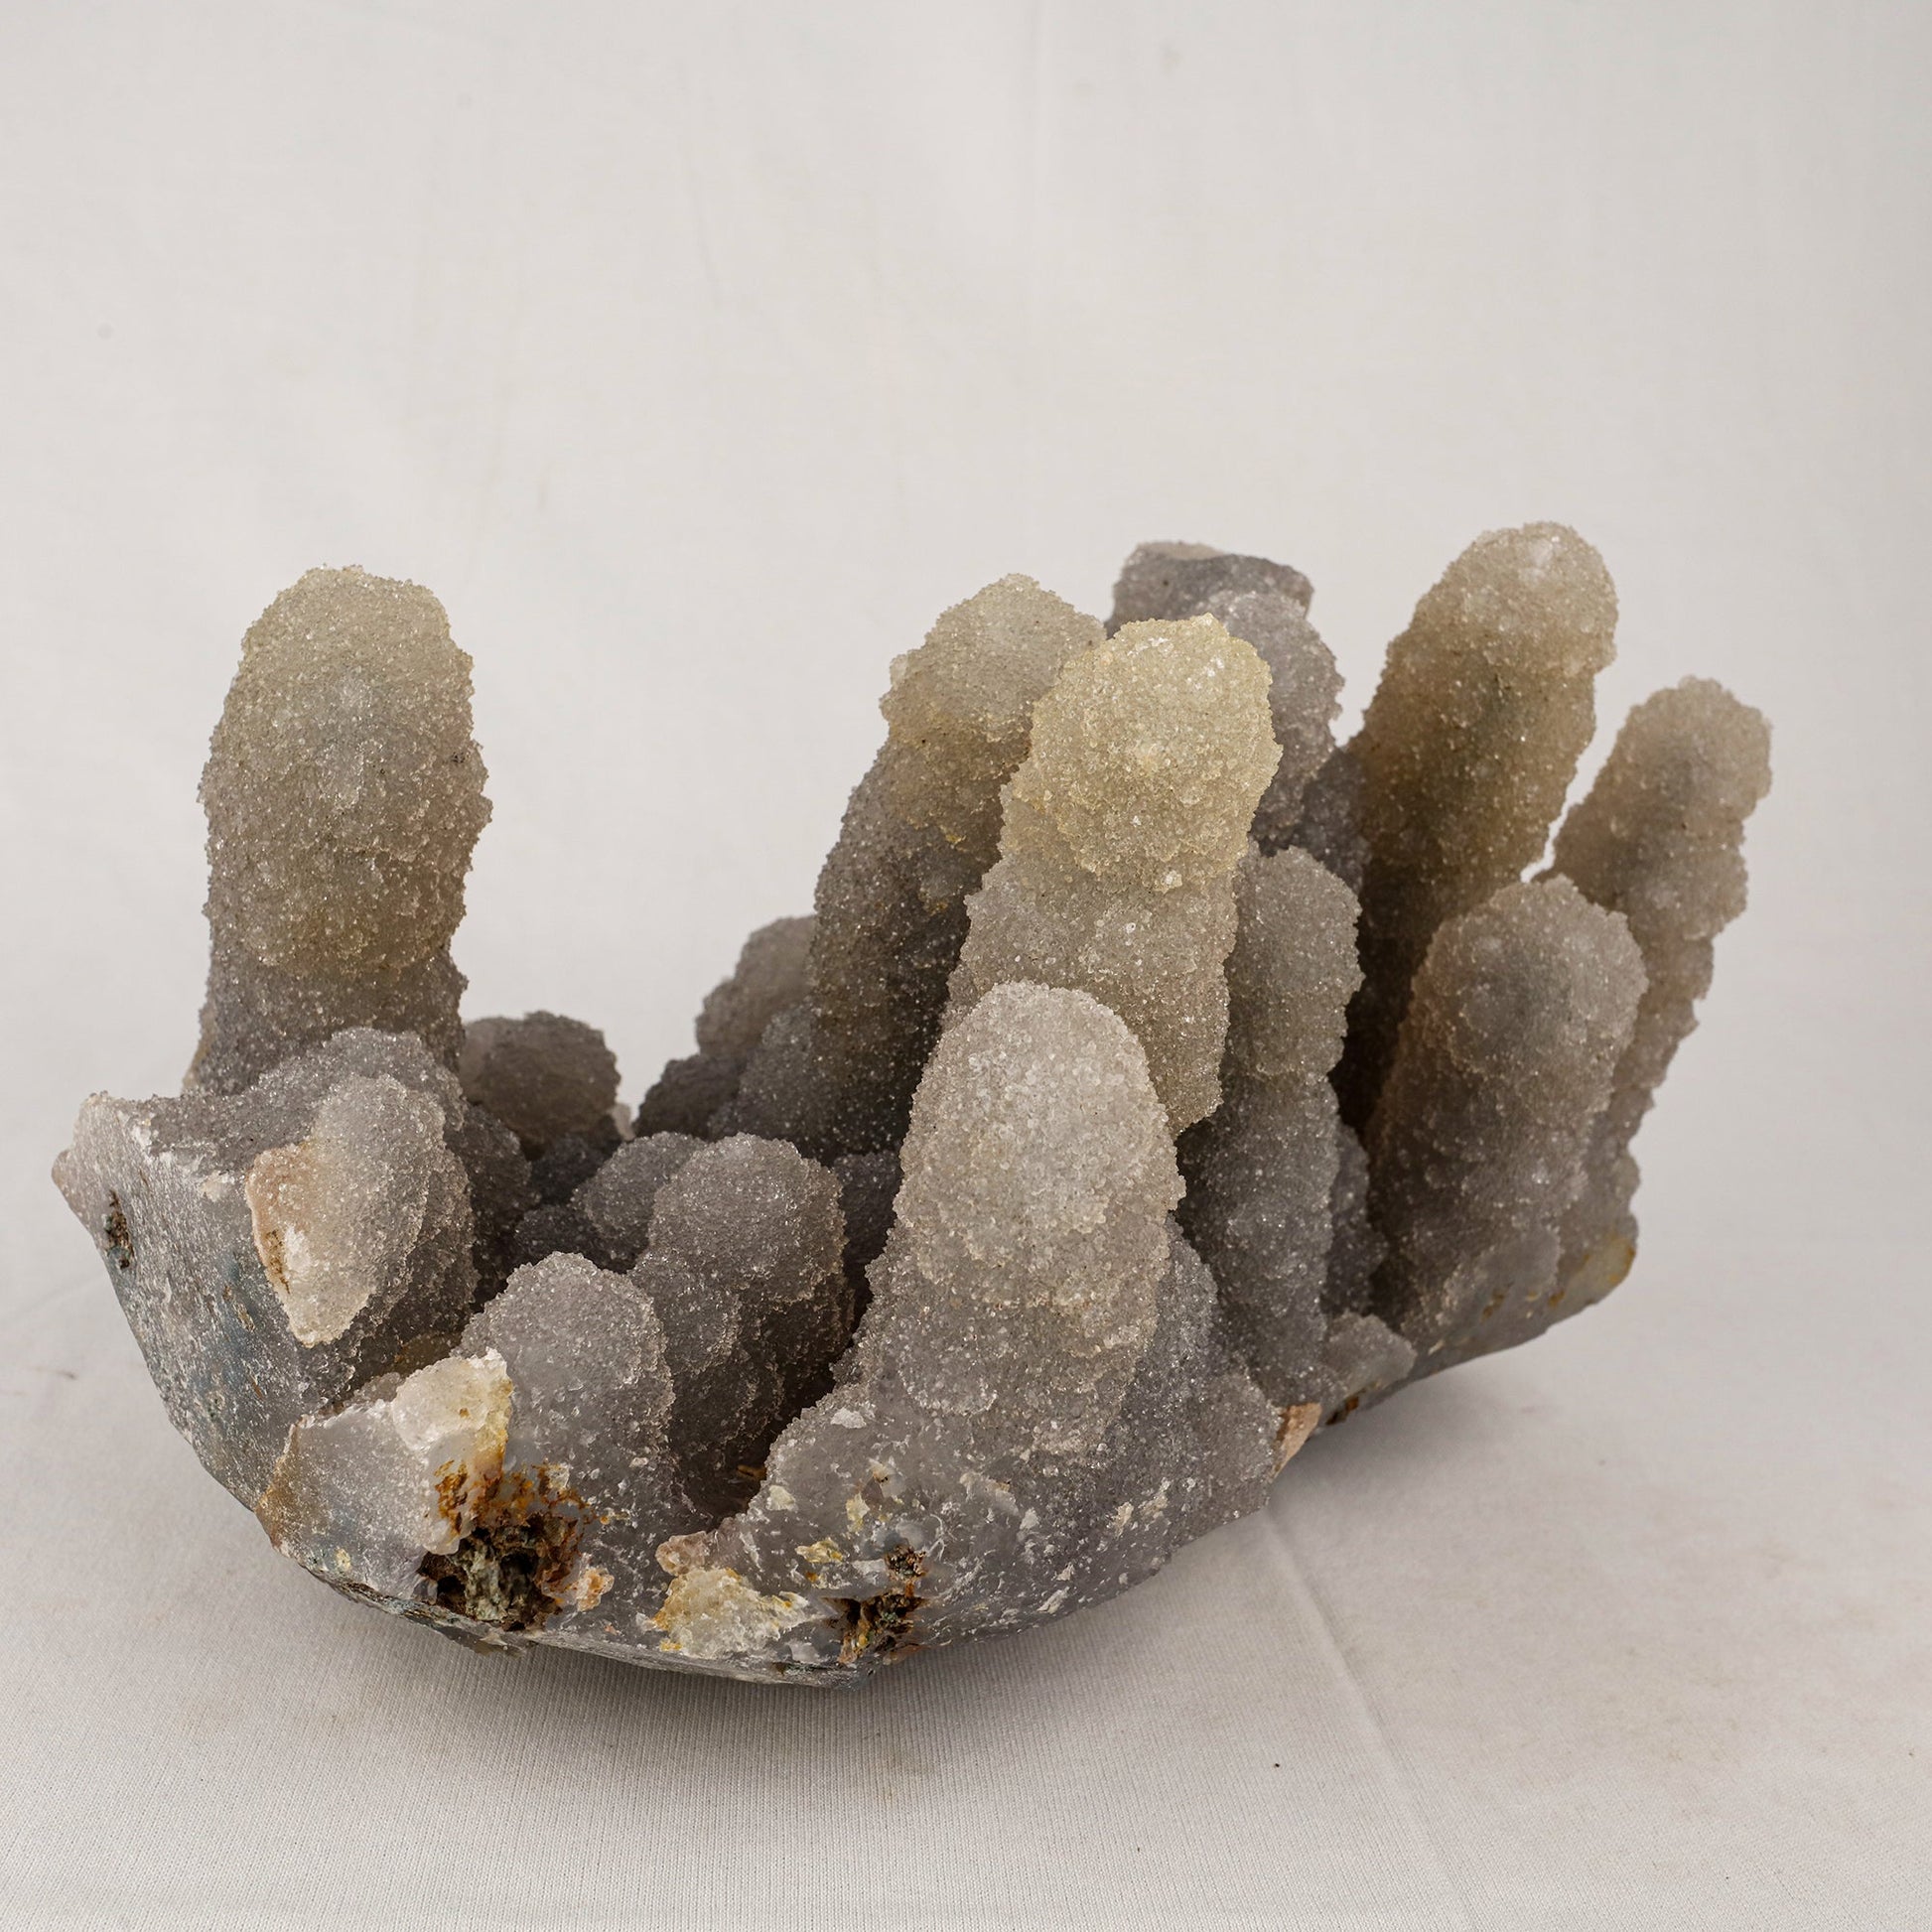 Chalcedony Stalactite Coral Formation Natural Mineral Specimen # B 5528 Chalcedony Superb Minerals 